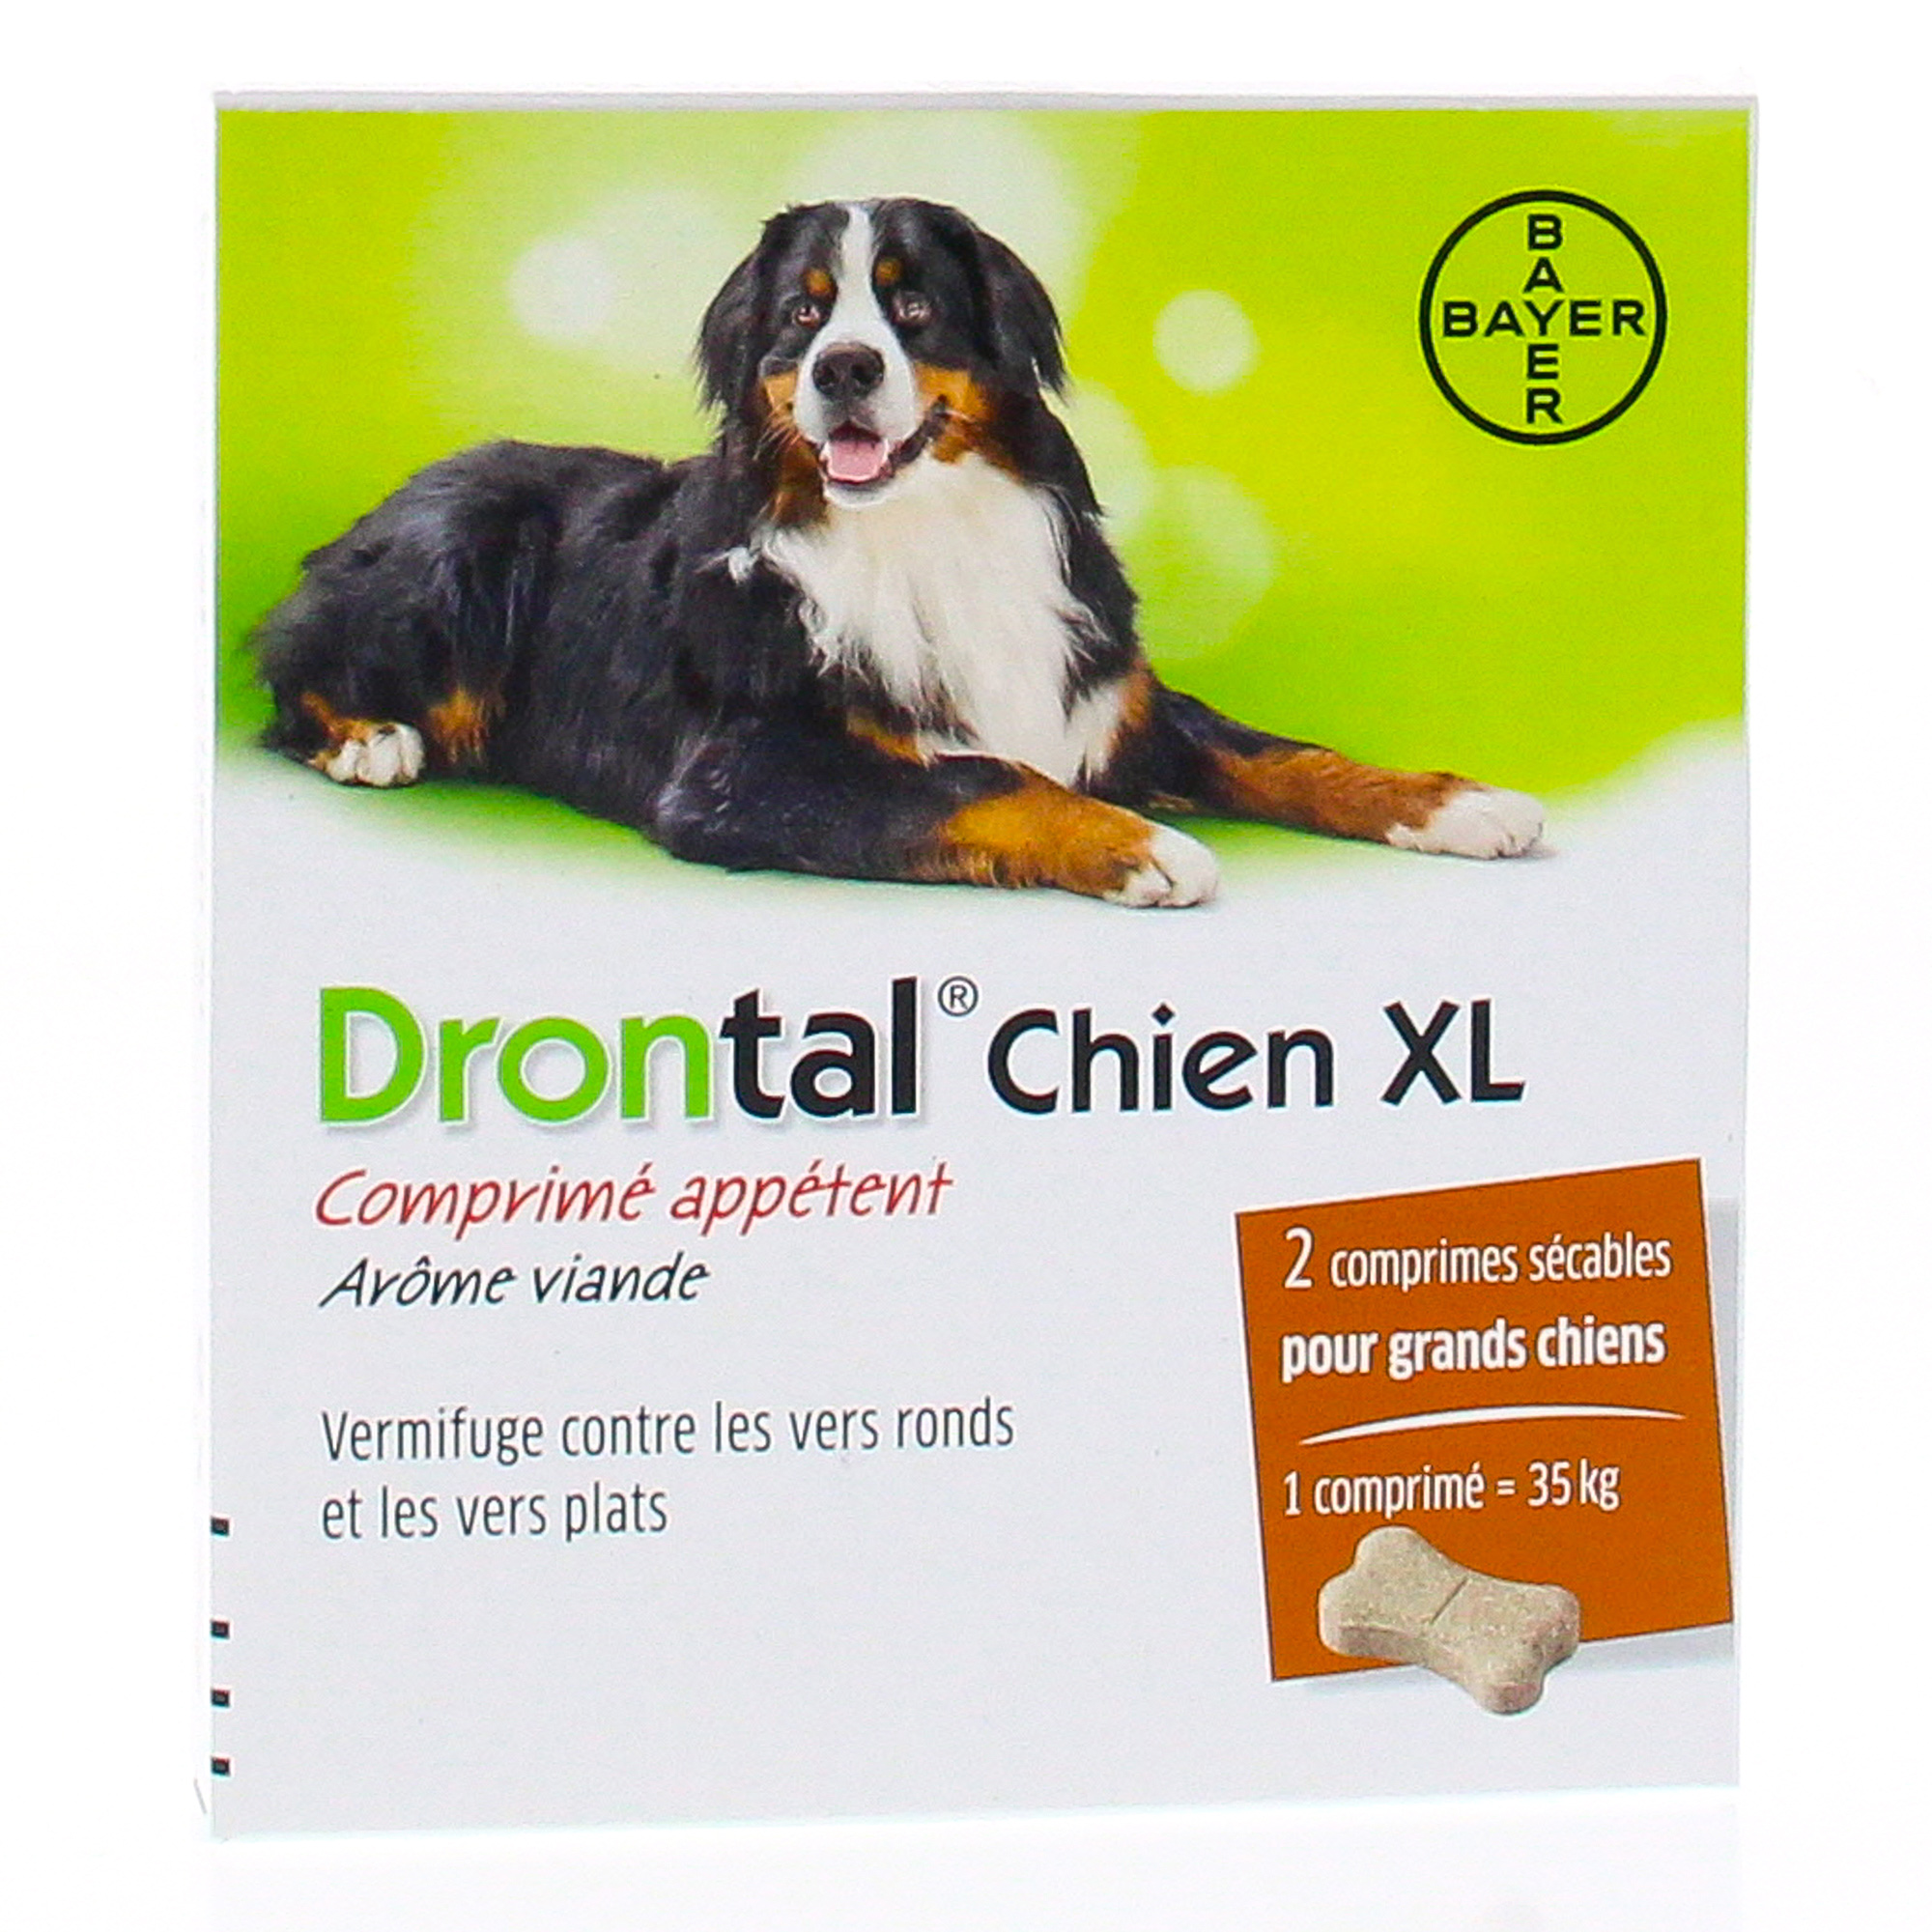 Drontal Chien 4 Cps